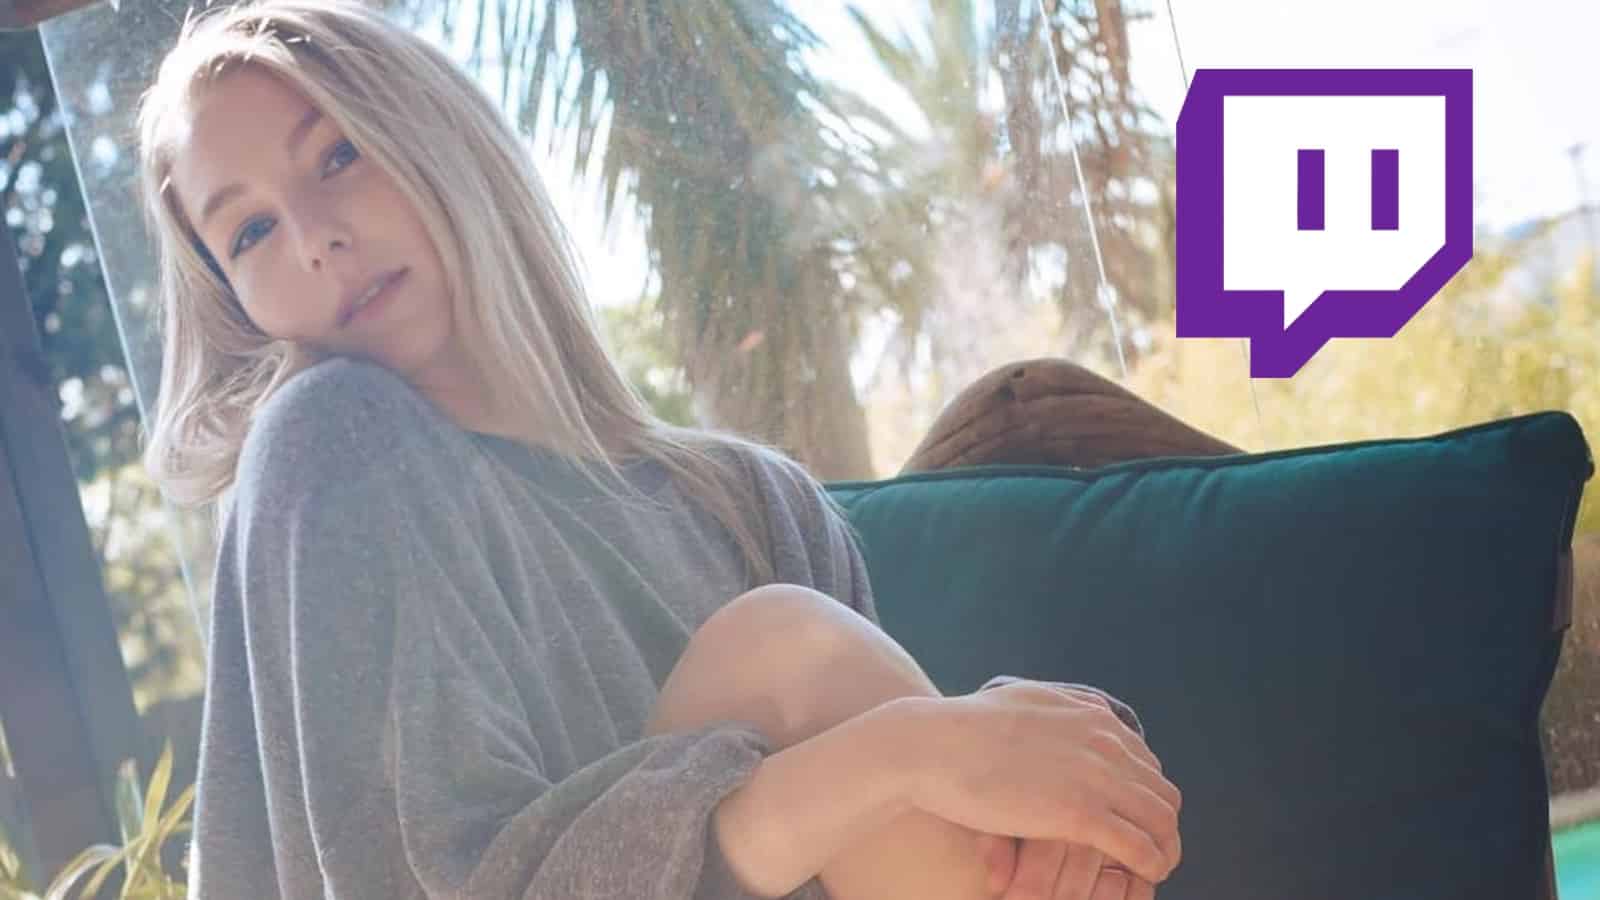 andre hidrawan recommends stpeach banned from twitch pic